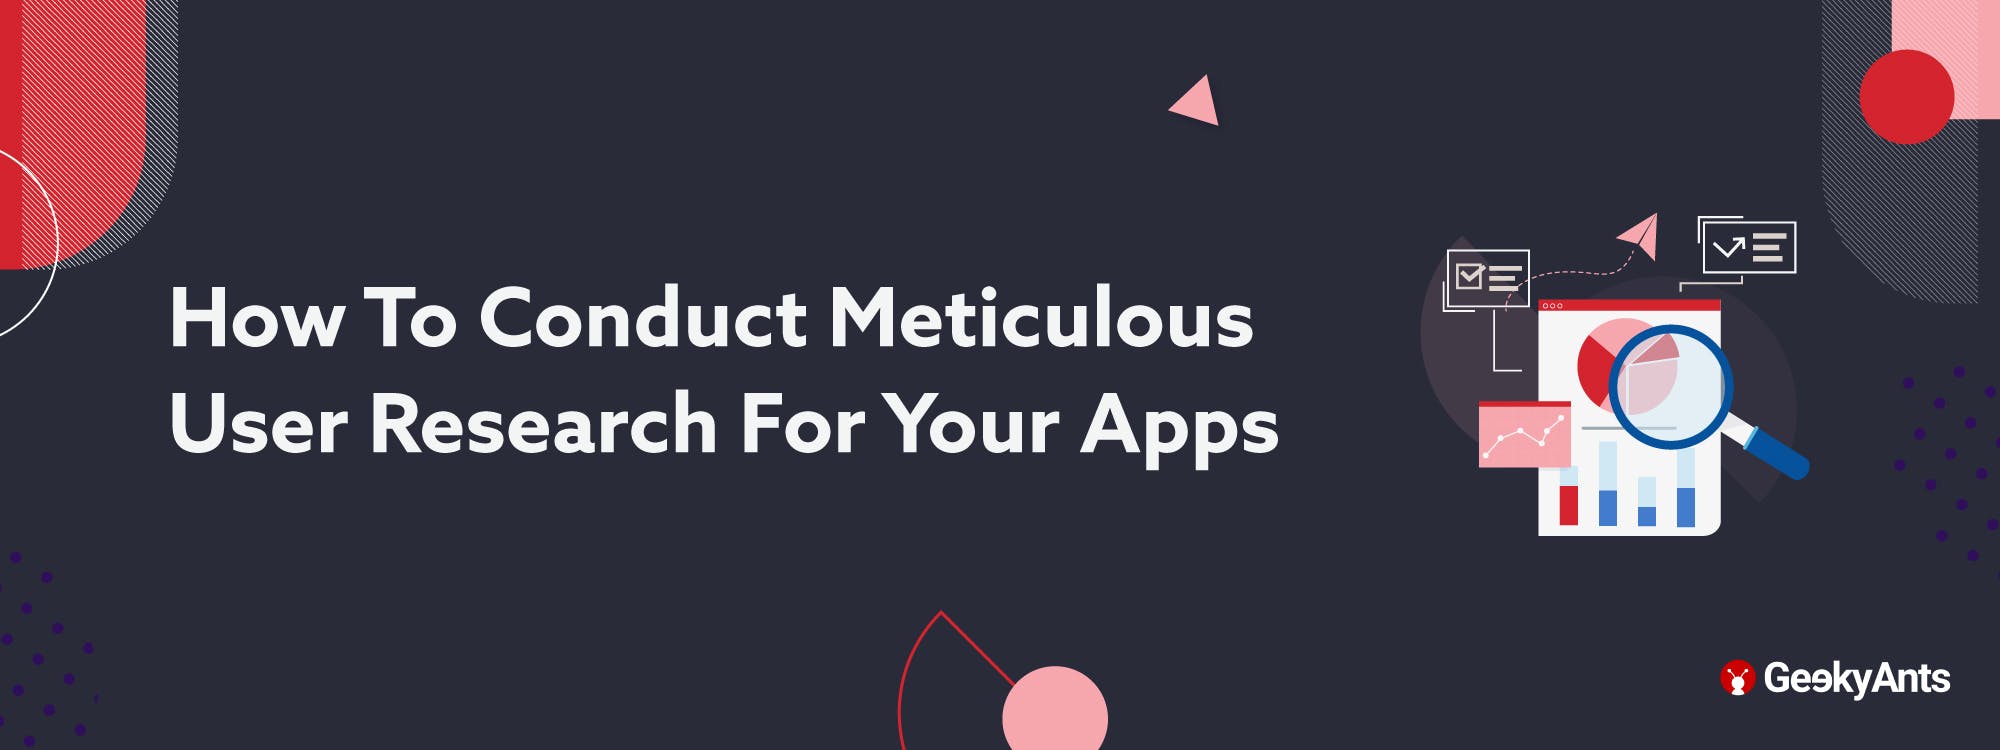 How To Conduct Meticulous User Research For Your Apps